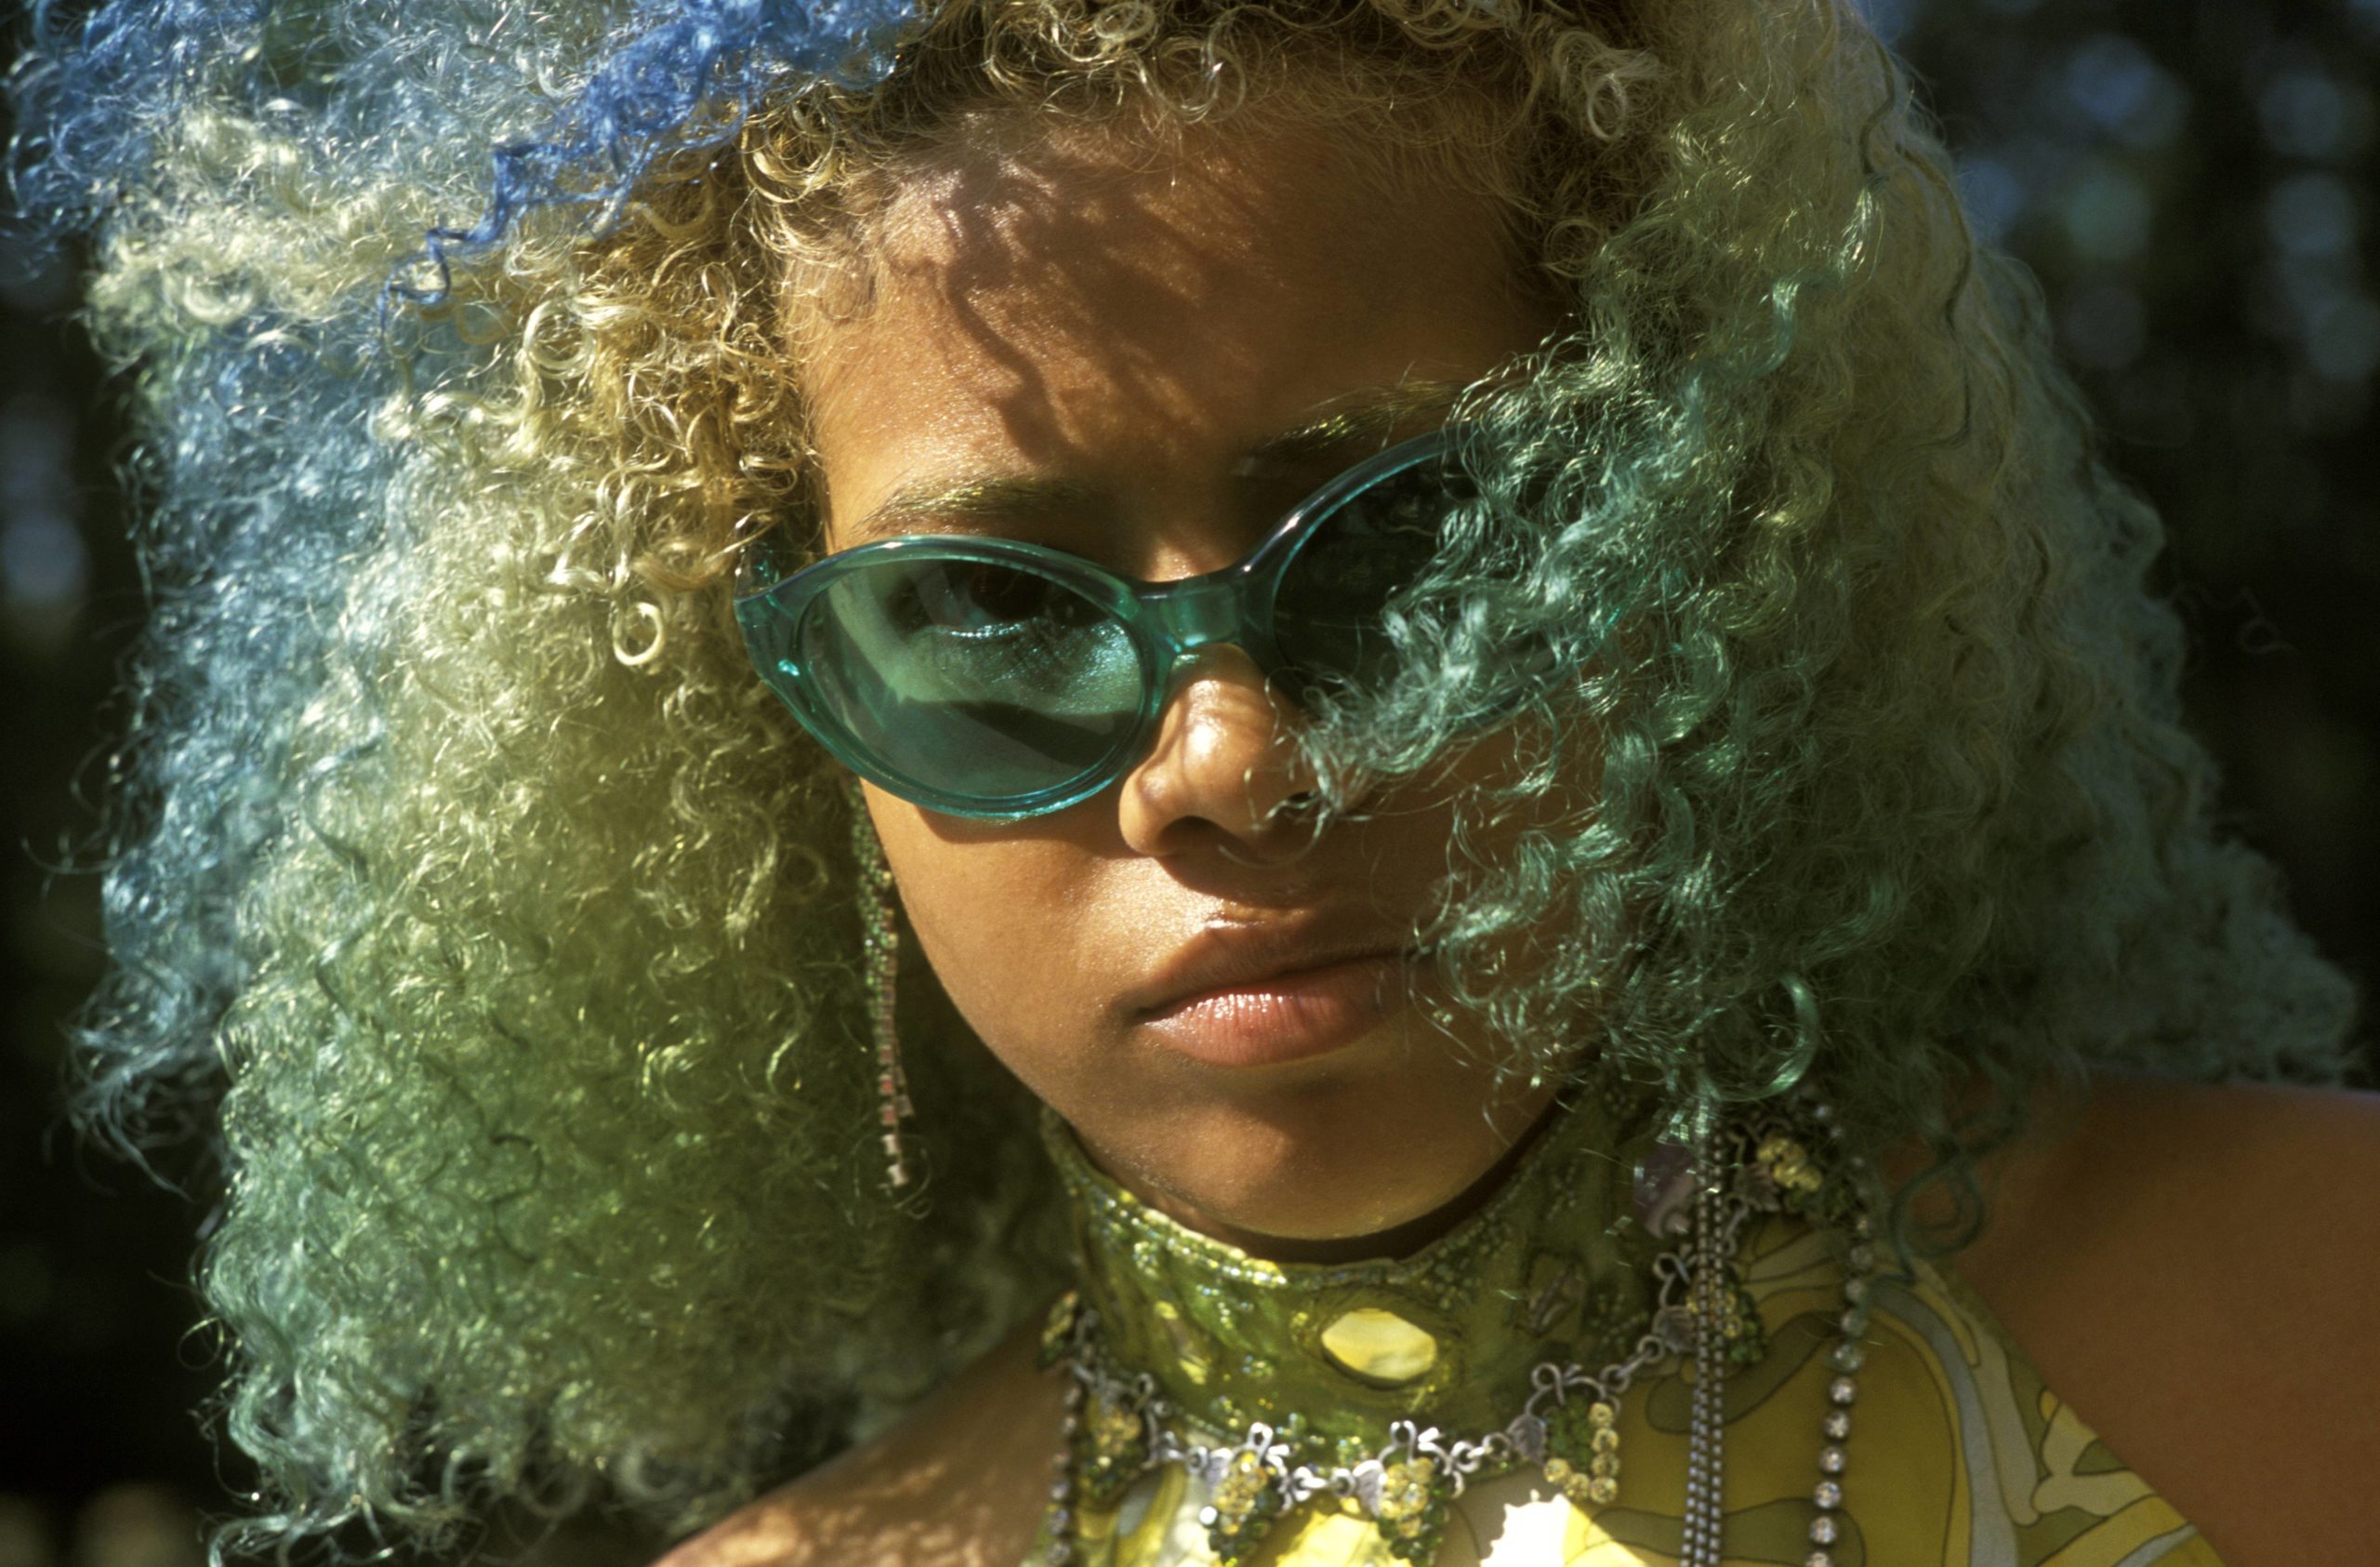 Kelis’ Story Is A Reminder Of How Unprincipled The Music Industry Can Be